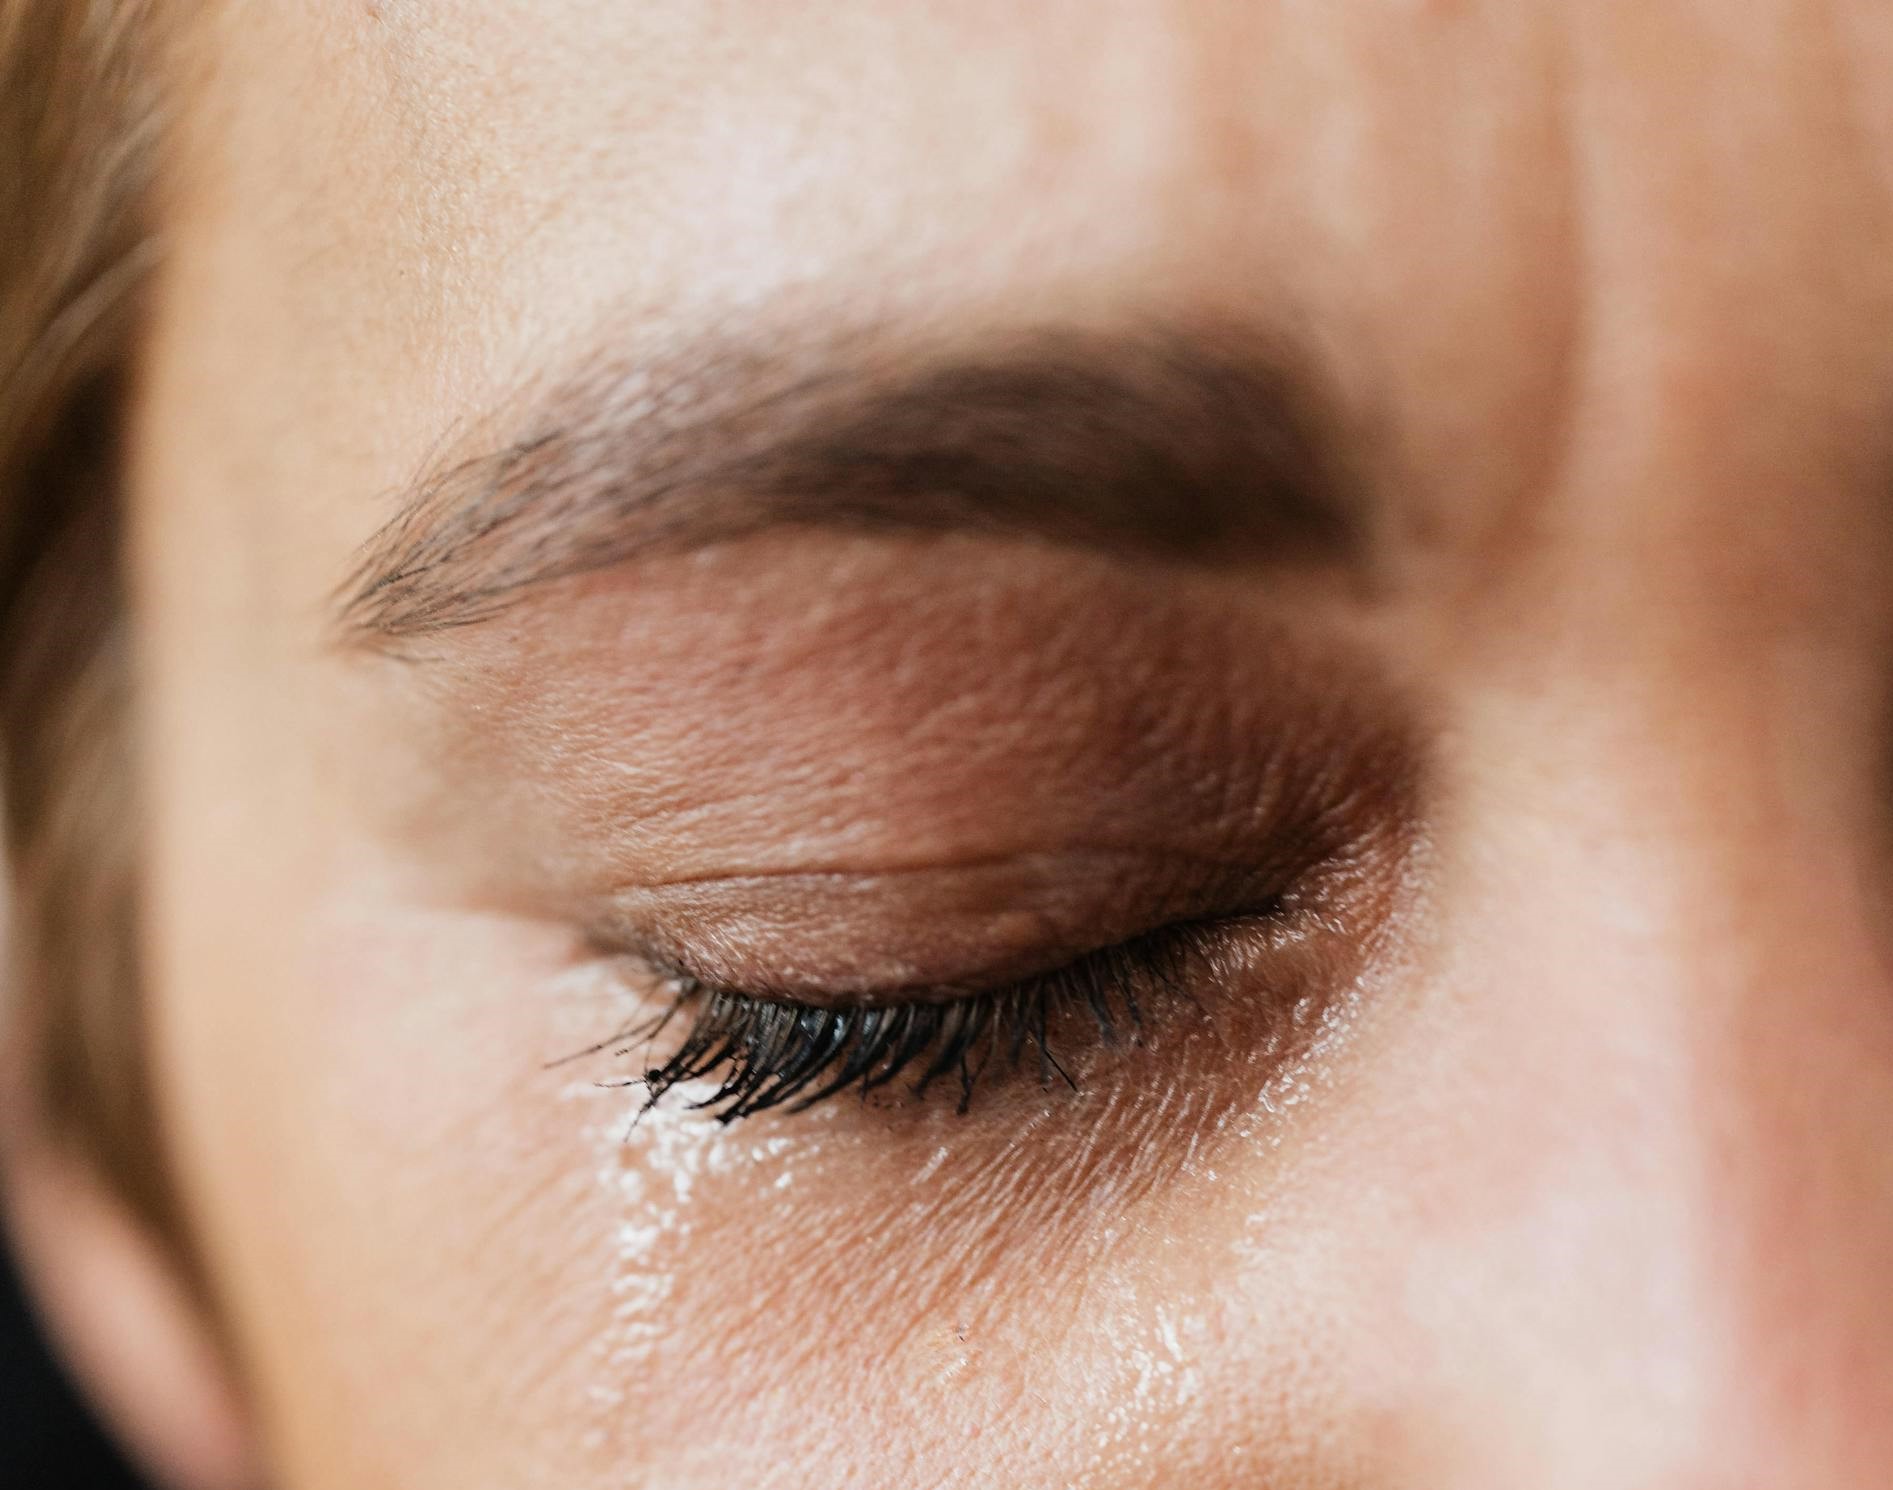 A startled and hurt woman with tears streaming down her face | Source: Pexels